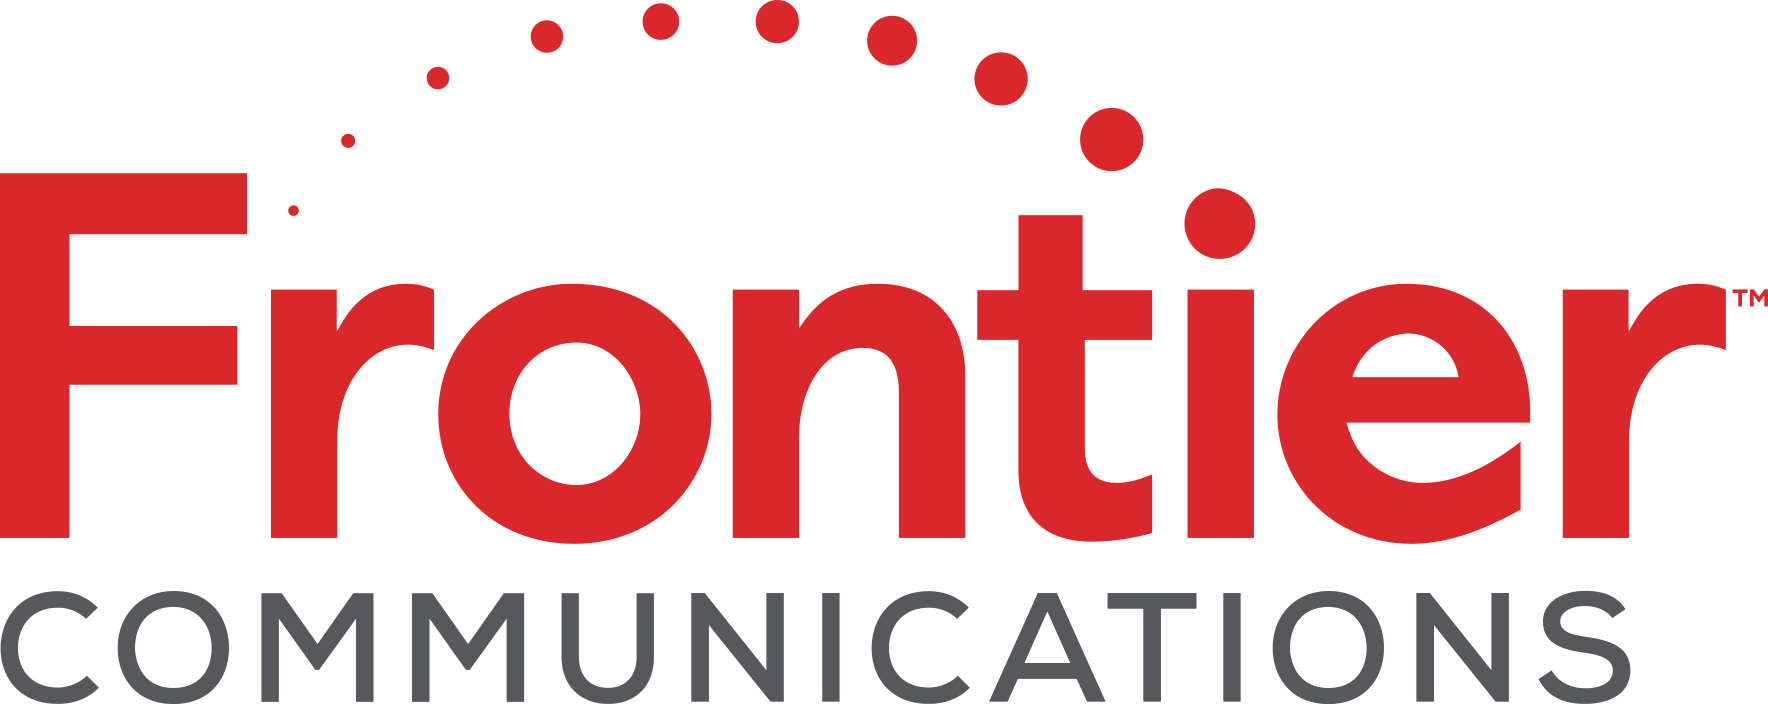 Frontier Communications-png.png